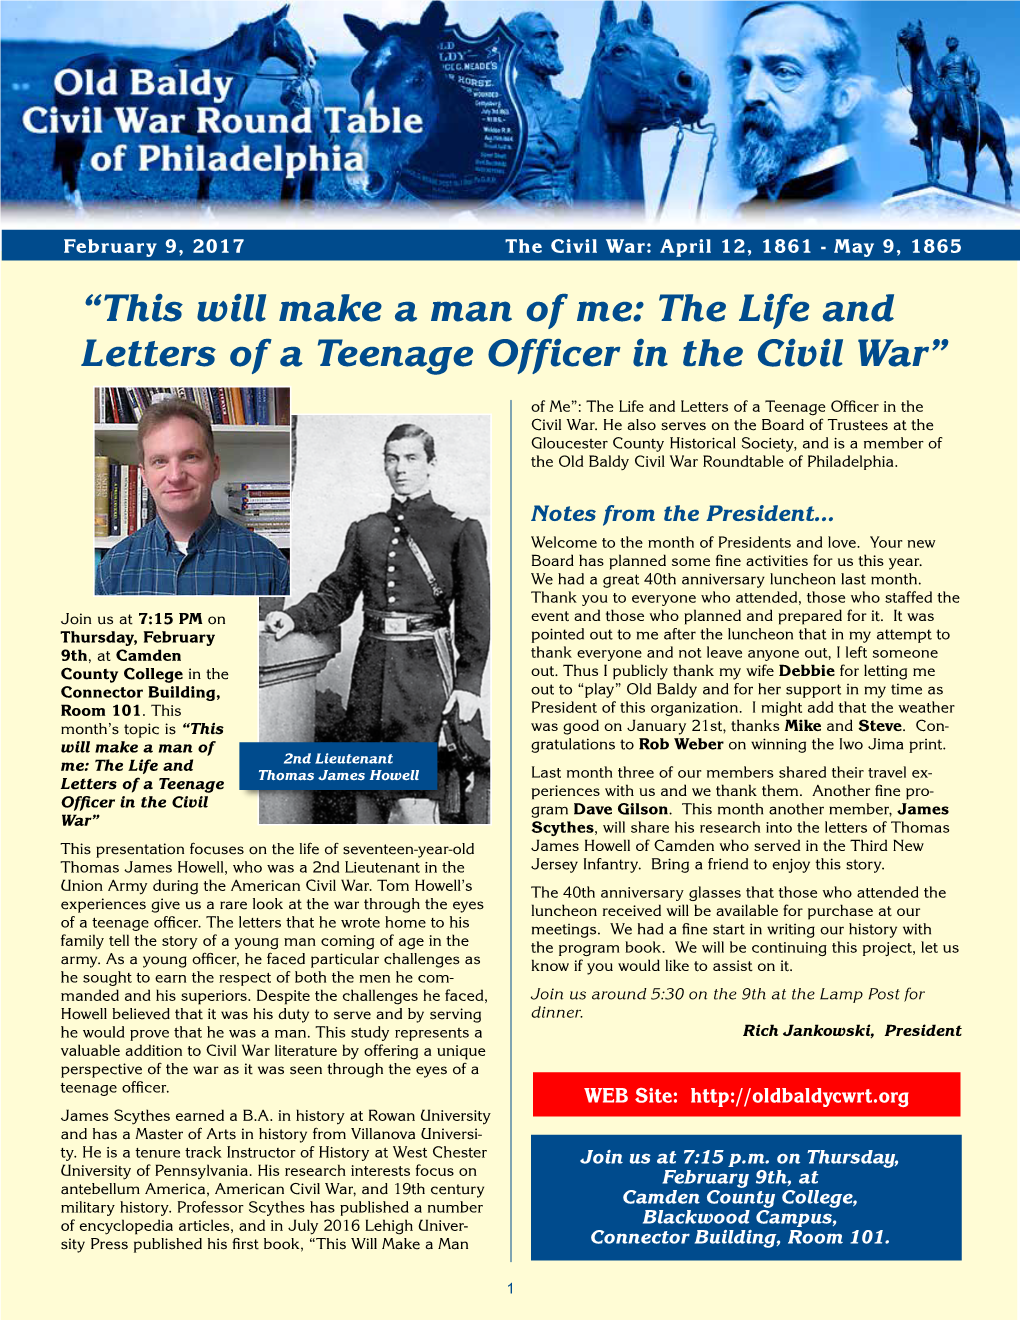 This Will Make a Man of Me: the Life and Letters of a Teenage Officer in the Civil War”